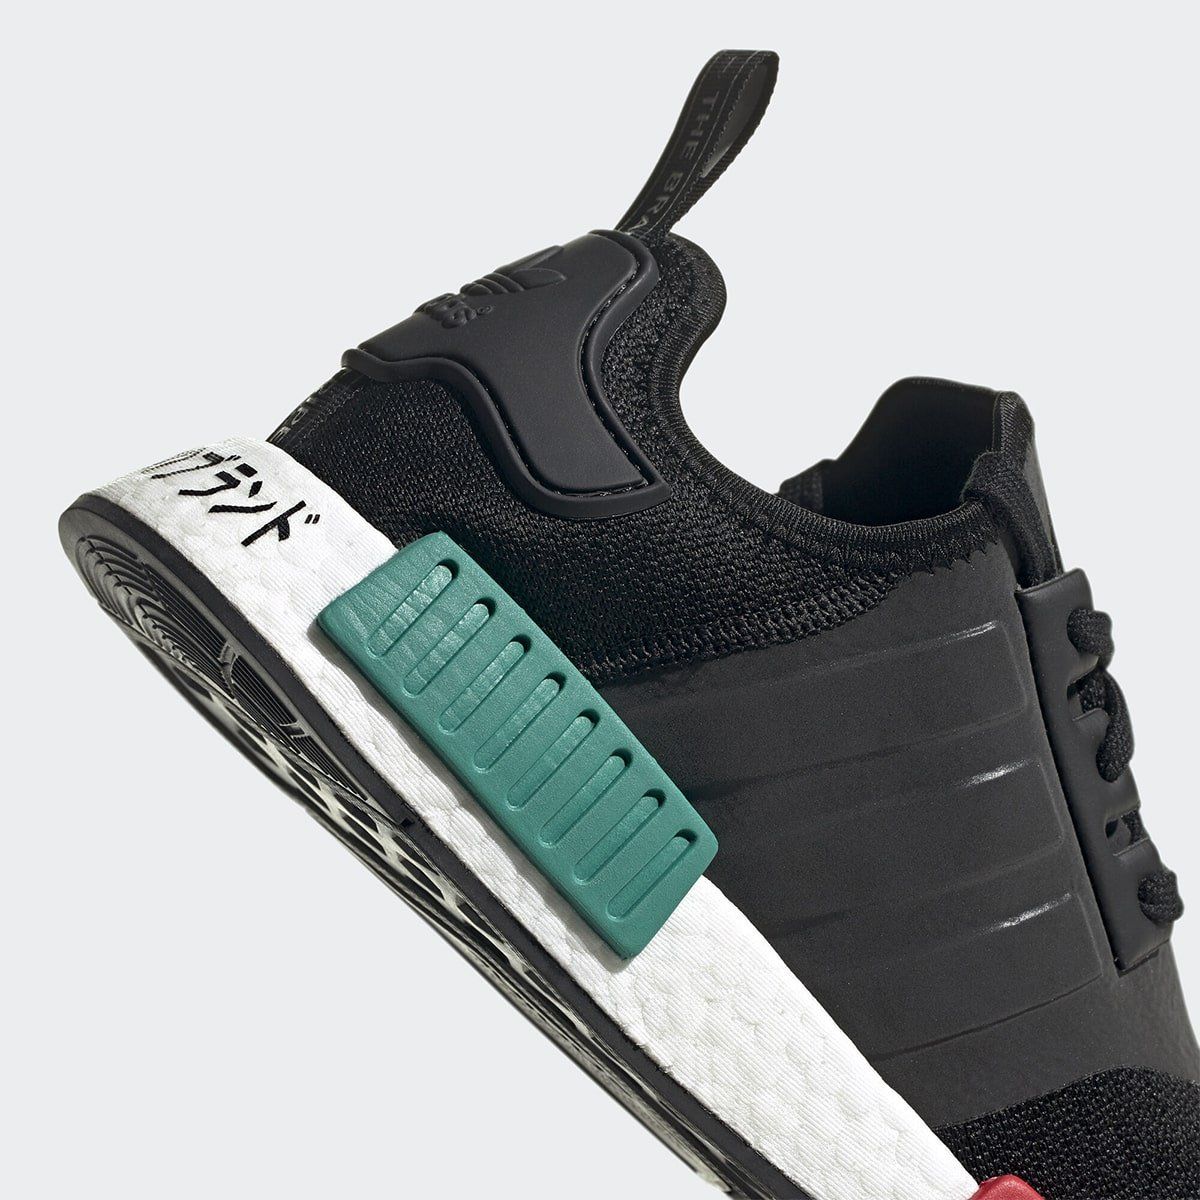 Før tøve Sandsynligvis Two New adidas NMD R1s Just Dropped! | HOUSE OF HEAT